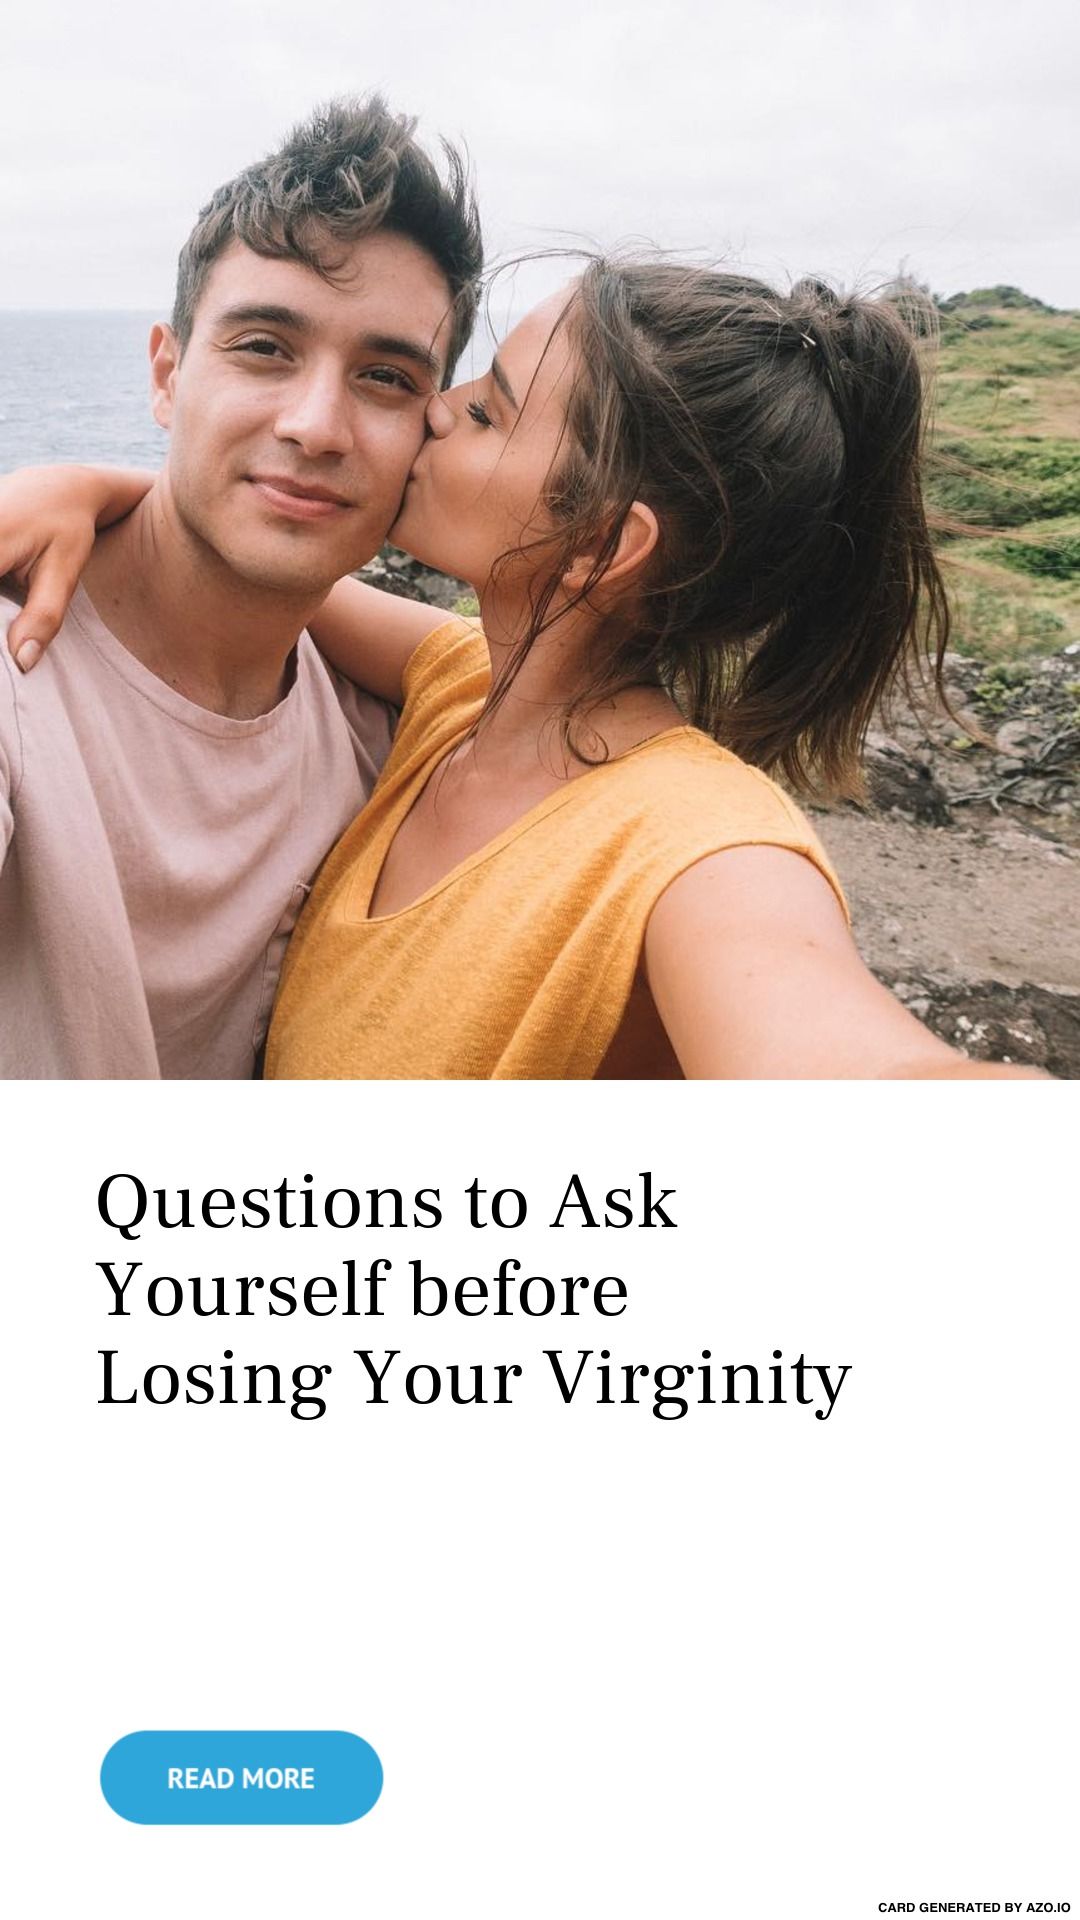 Comet reccomend Questions about losing your virginity